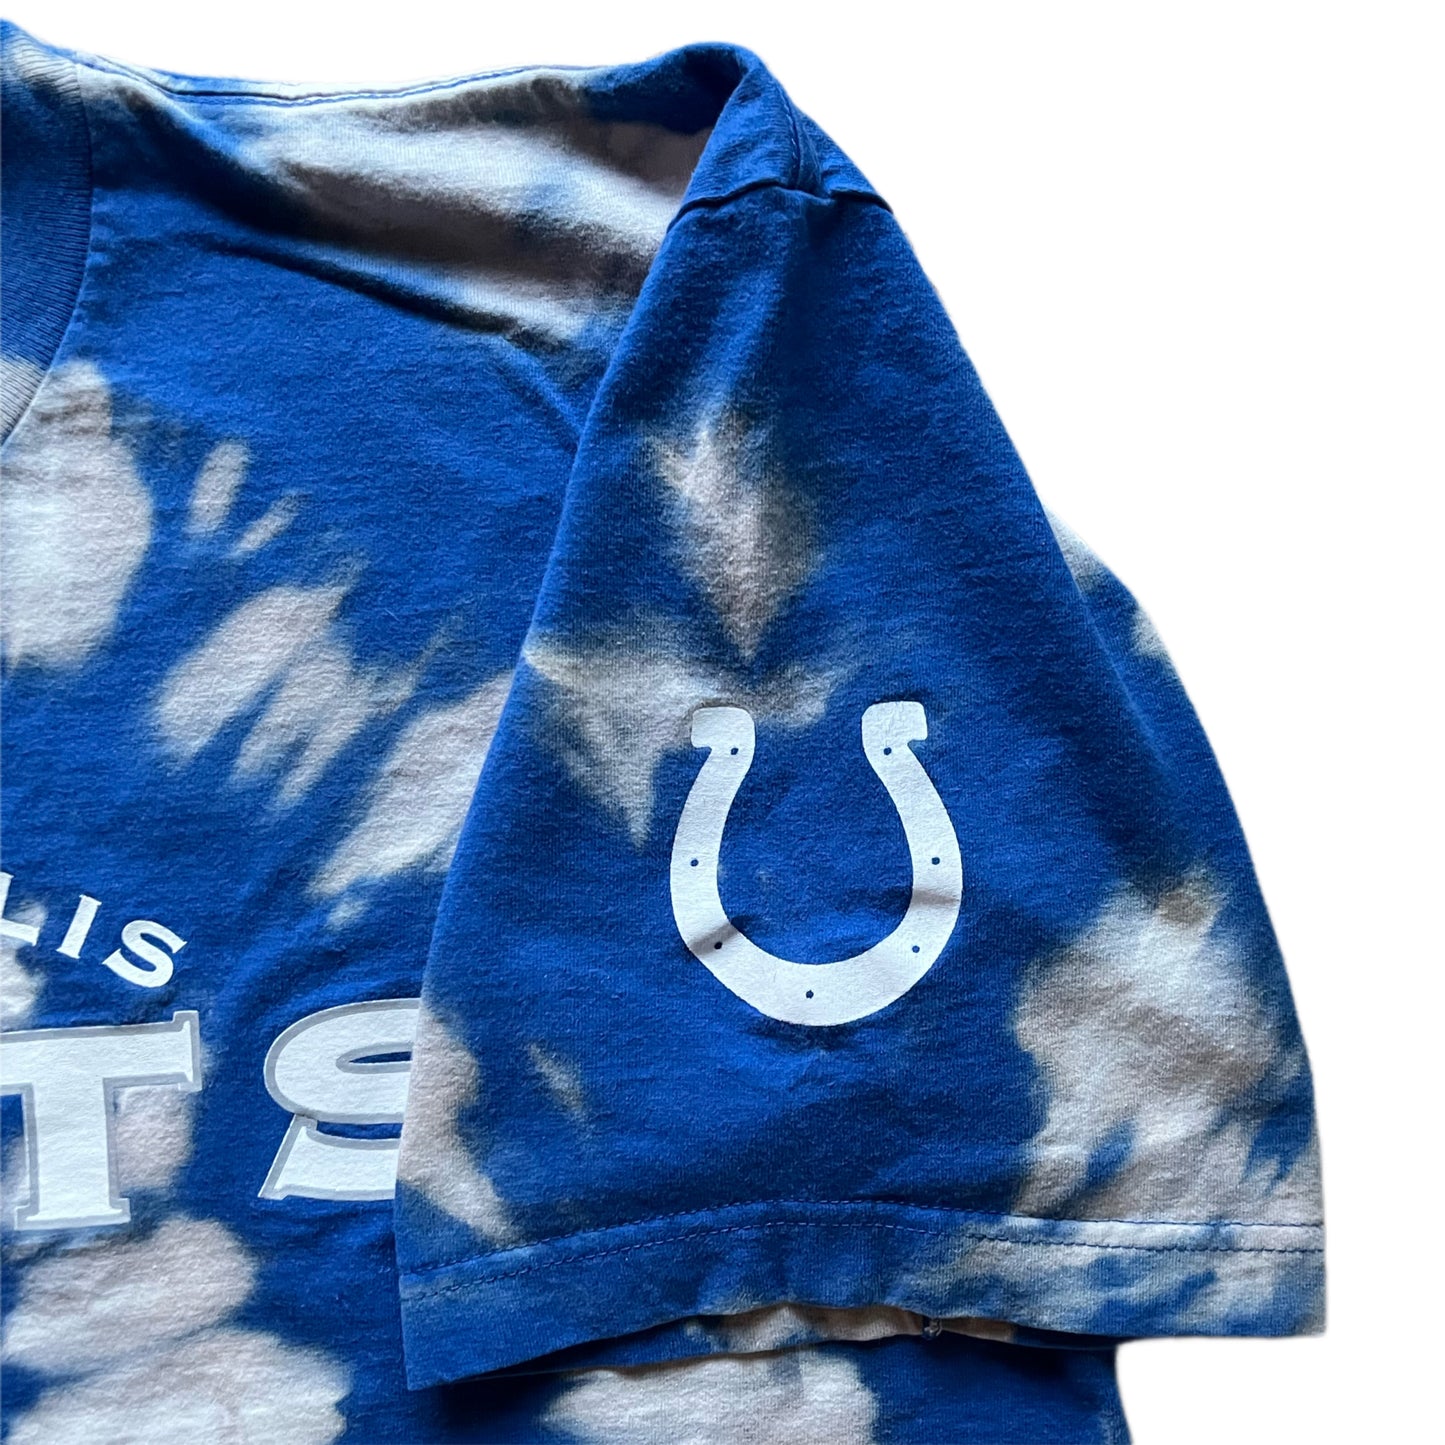 VBB Client Request: INDIANAPOLIS COLTS TEE SLEEVE LOGO